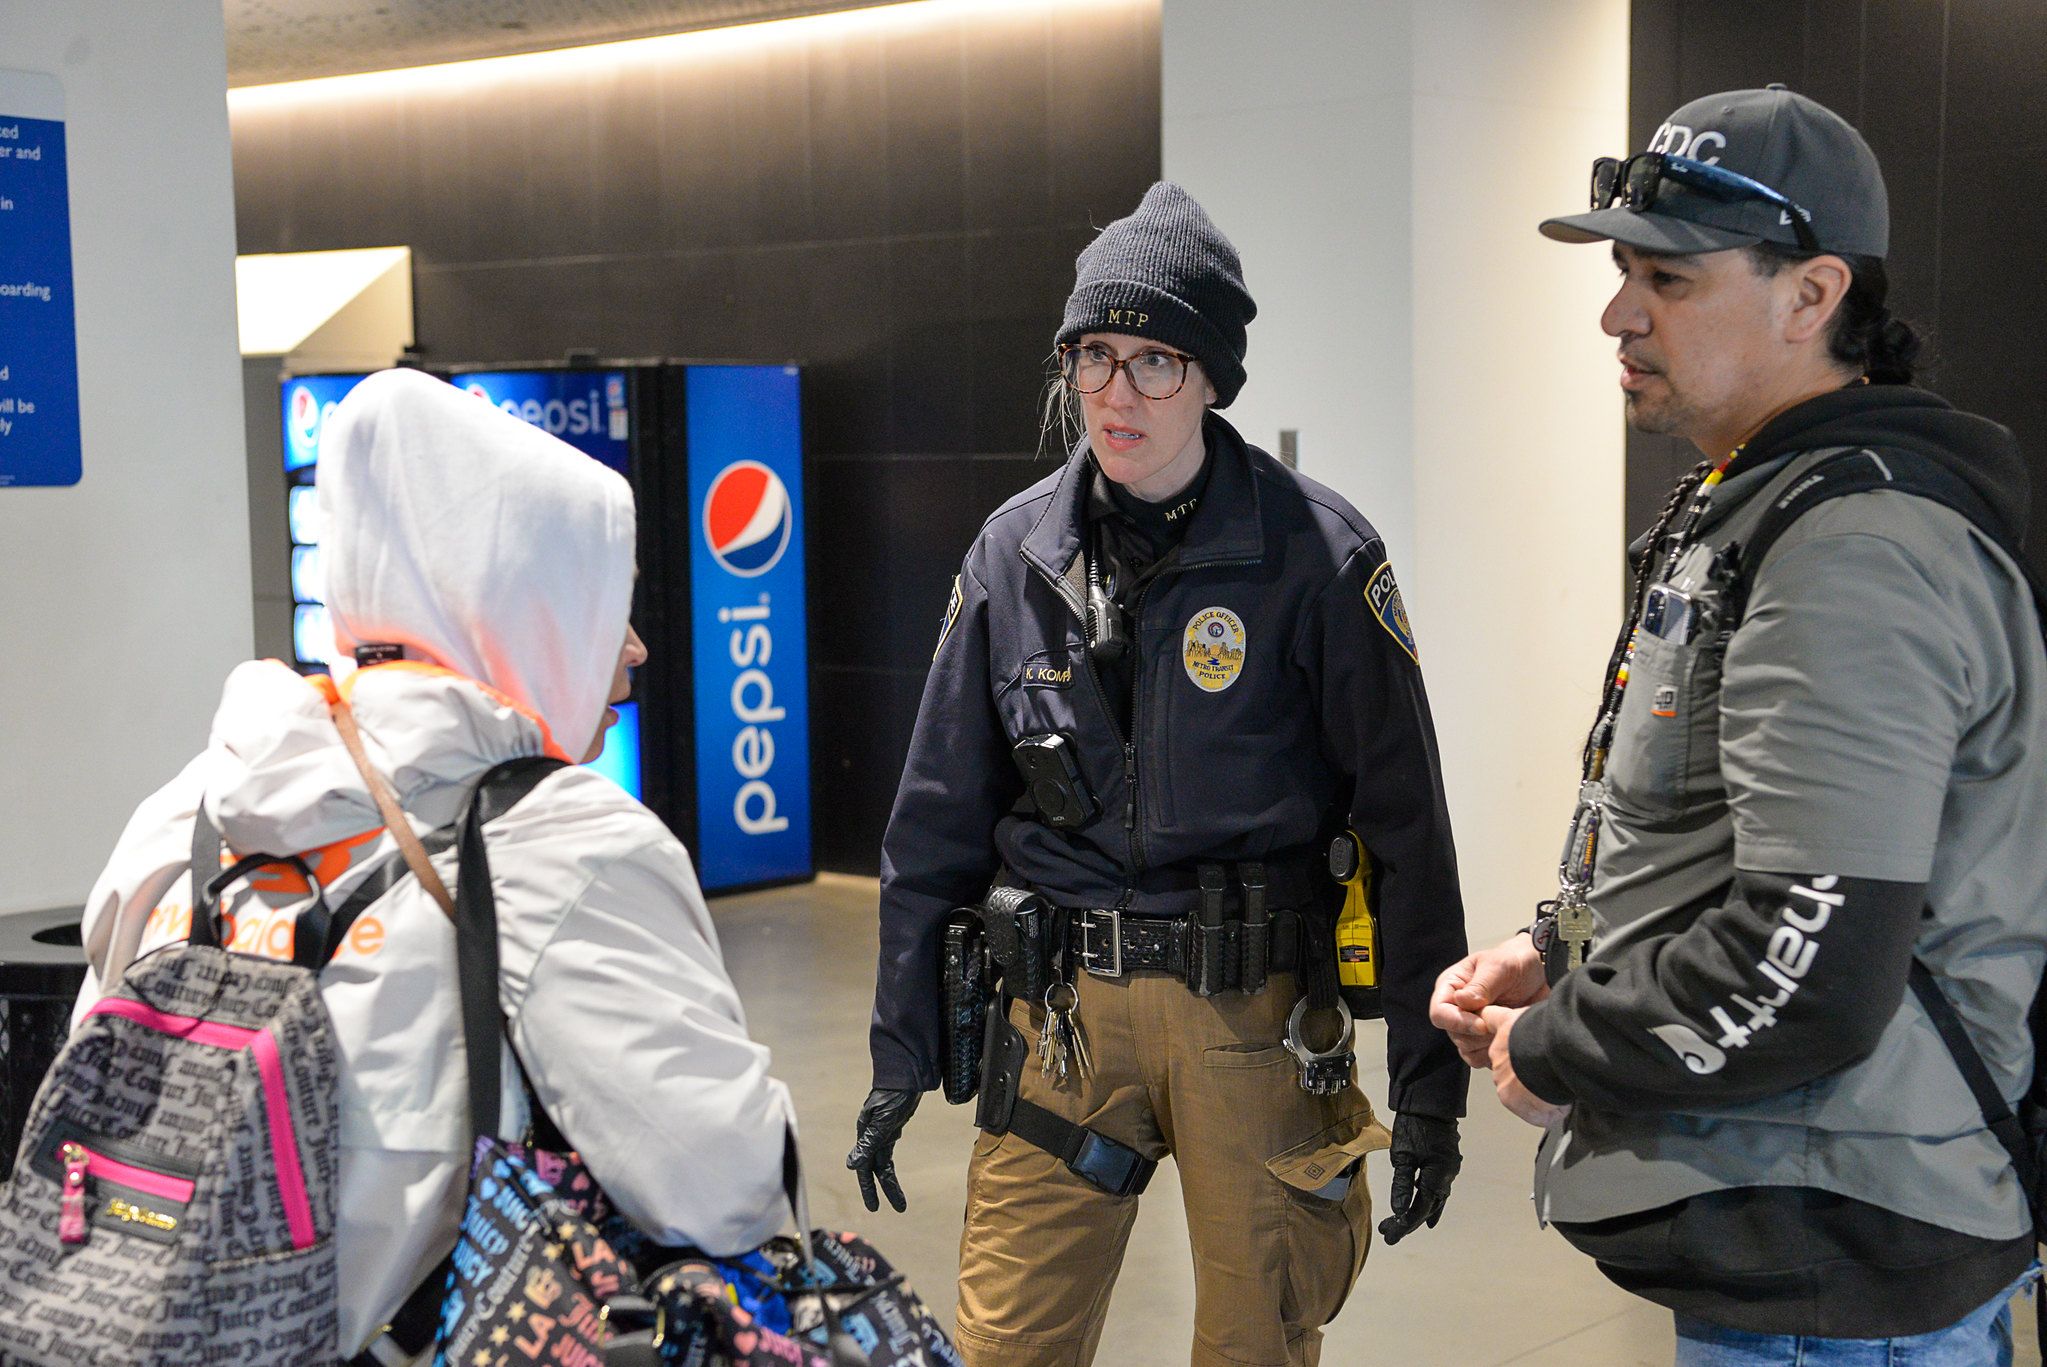 A Metro Transit police officer and community partner speak with a person at the Mall of America Transit Center.